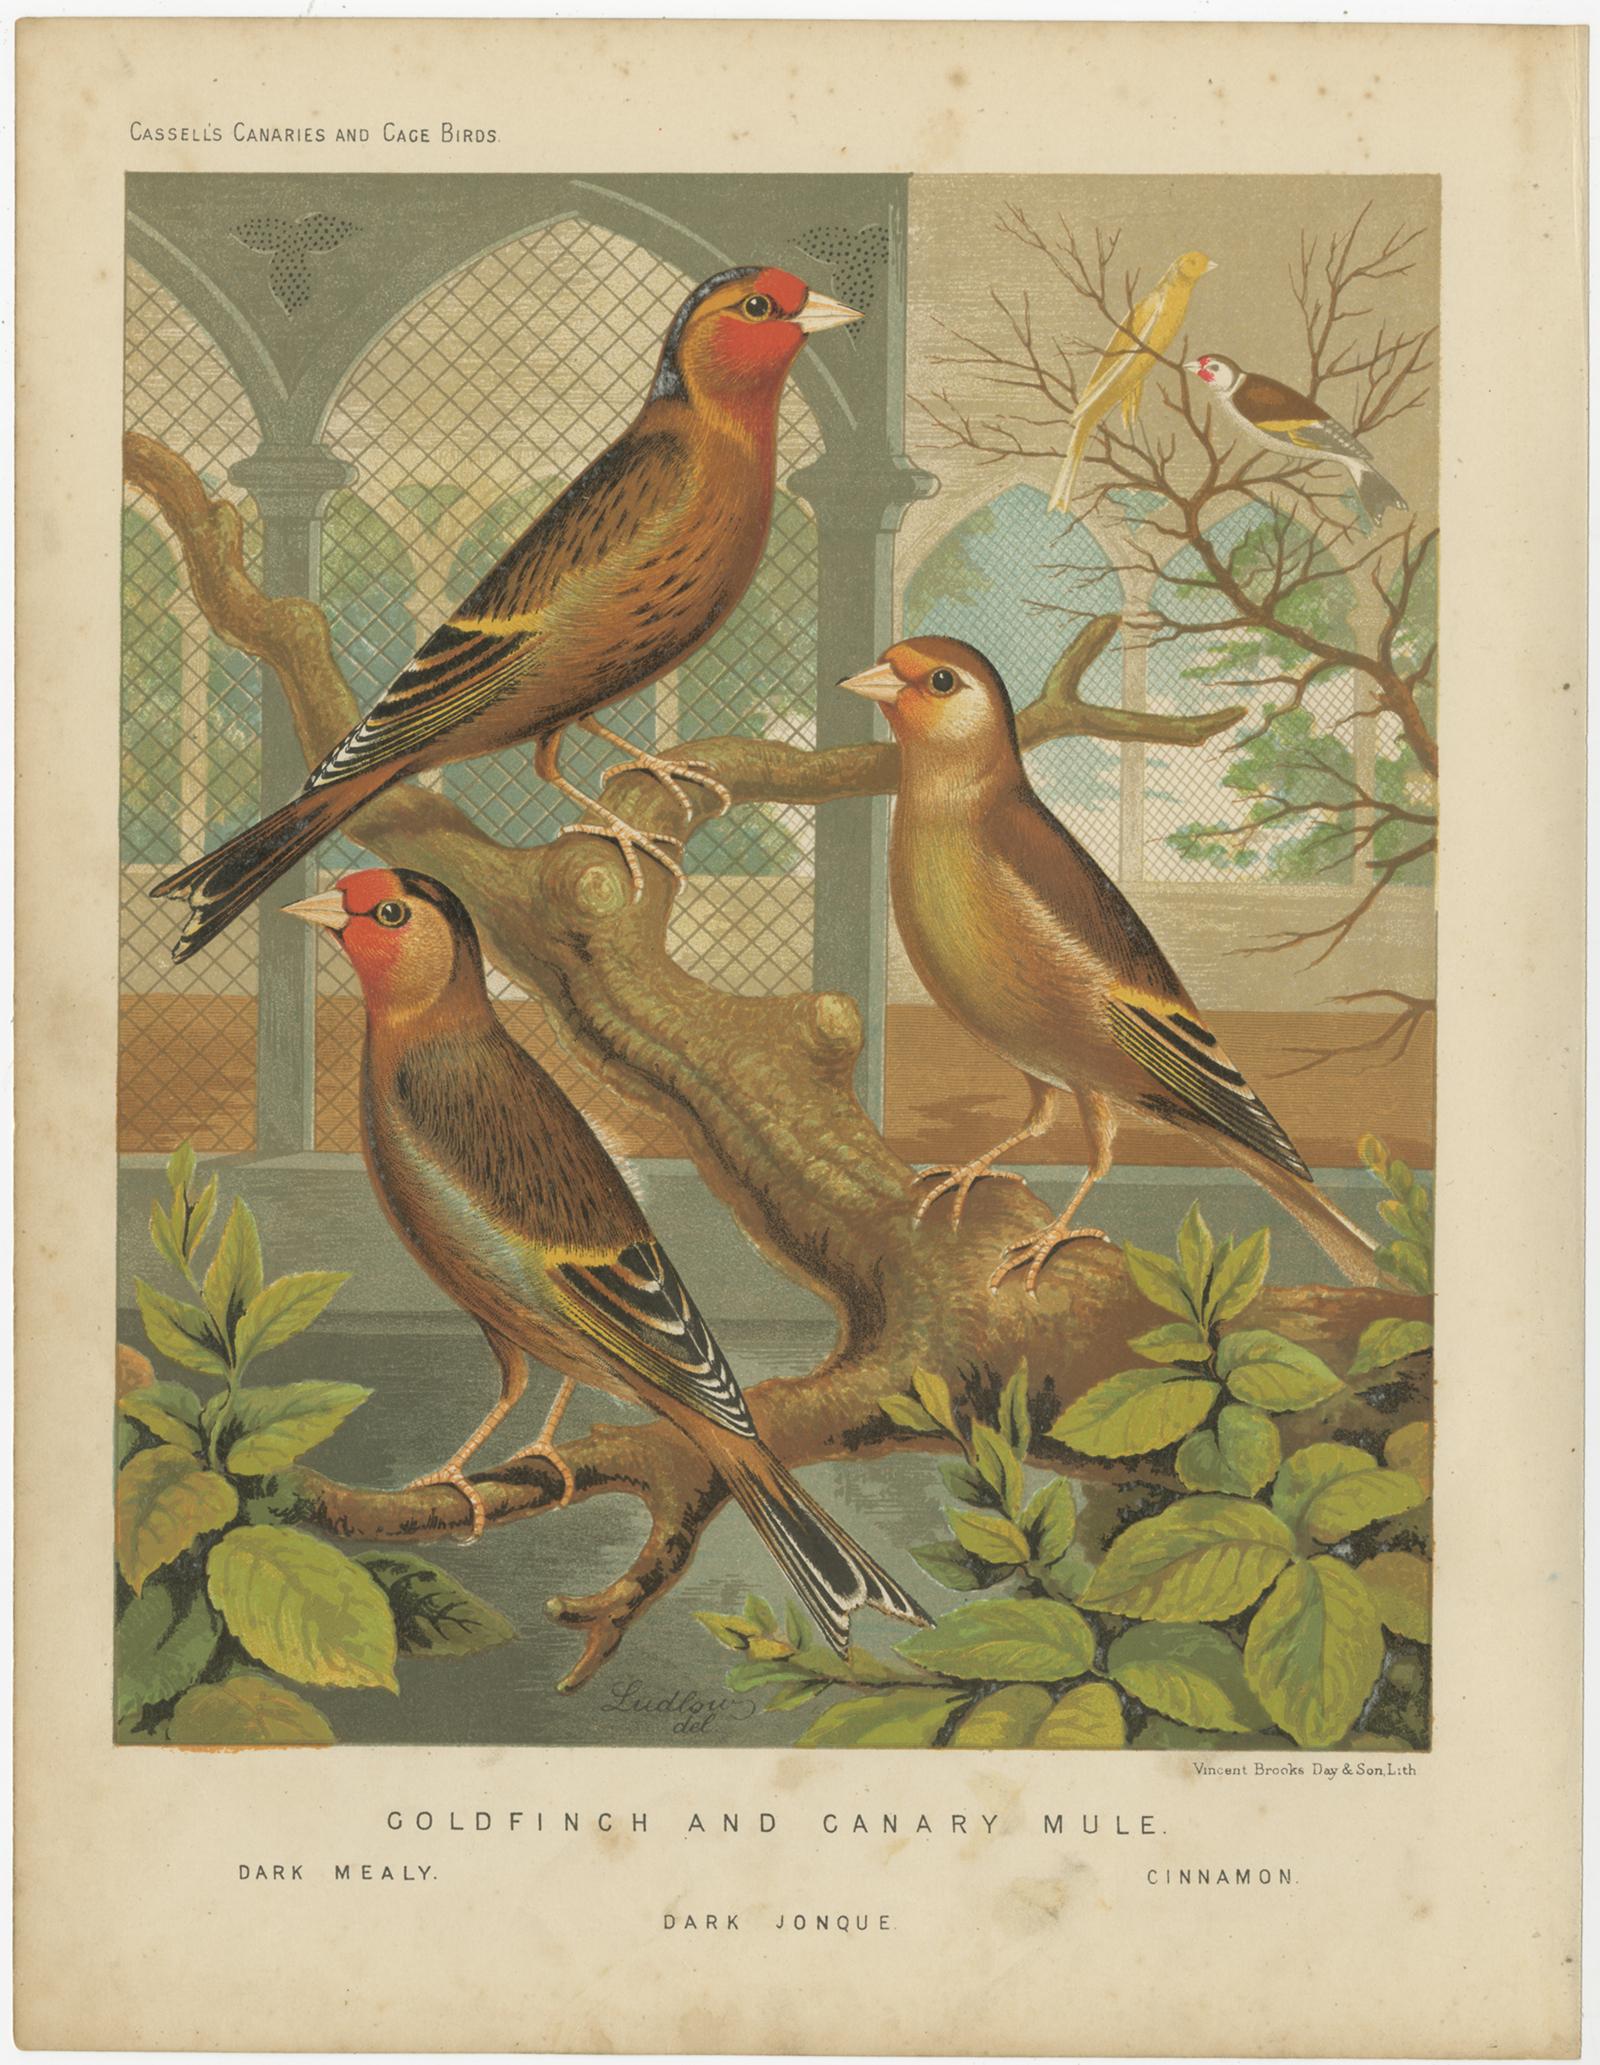 Antique bird print titled 'Goldfinch and Canary Mule 1. Dark Mealy 2. Dark Jonque 3. Cinnamon' Old bird print depicting the Goldfinch and Canary Mule: Dark Mealy, Dark Jonque and Cinnamon. This print originates from: 'Illustrated book of canaries